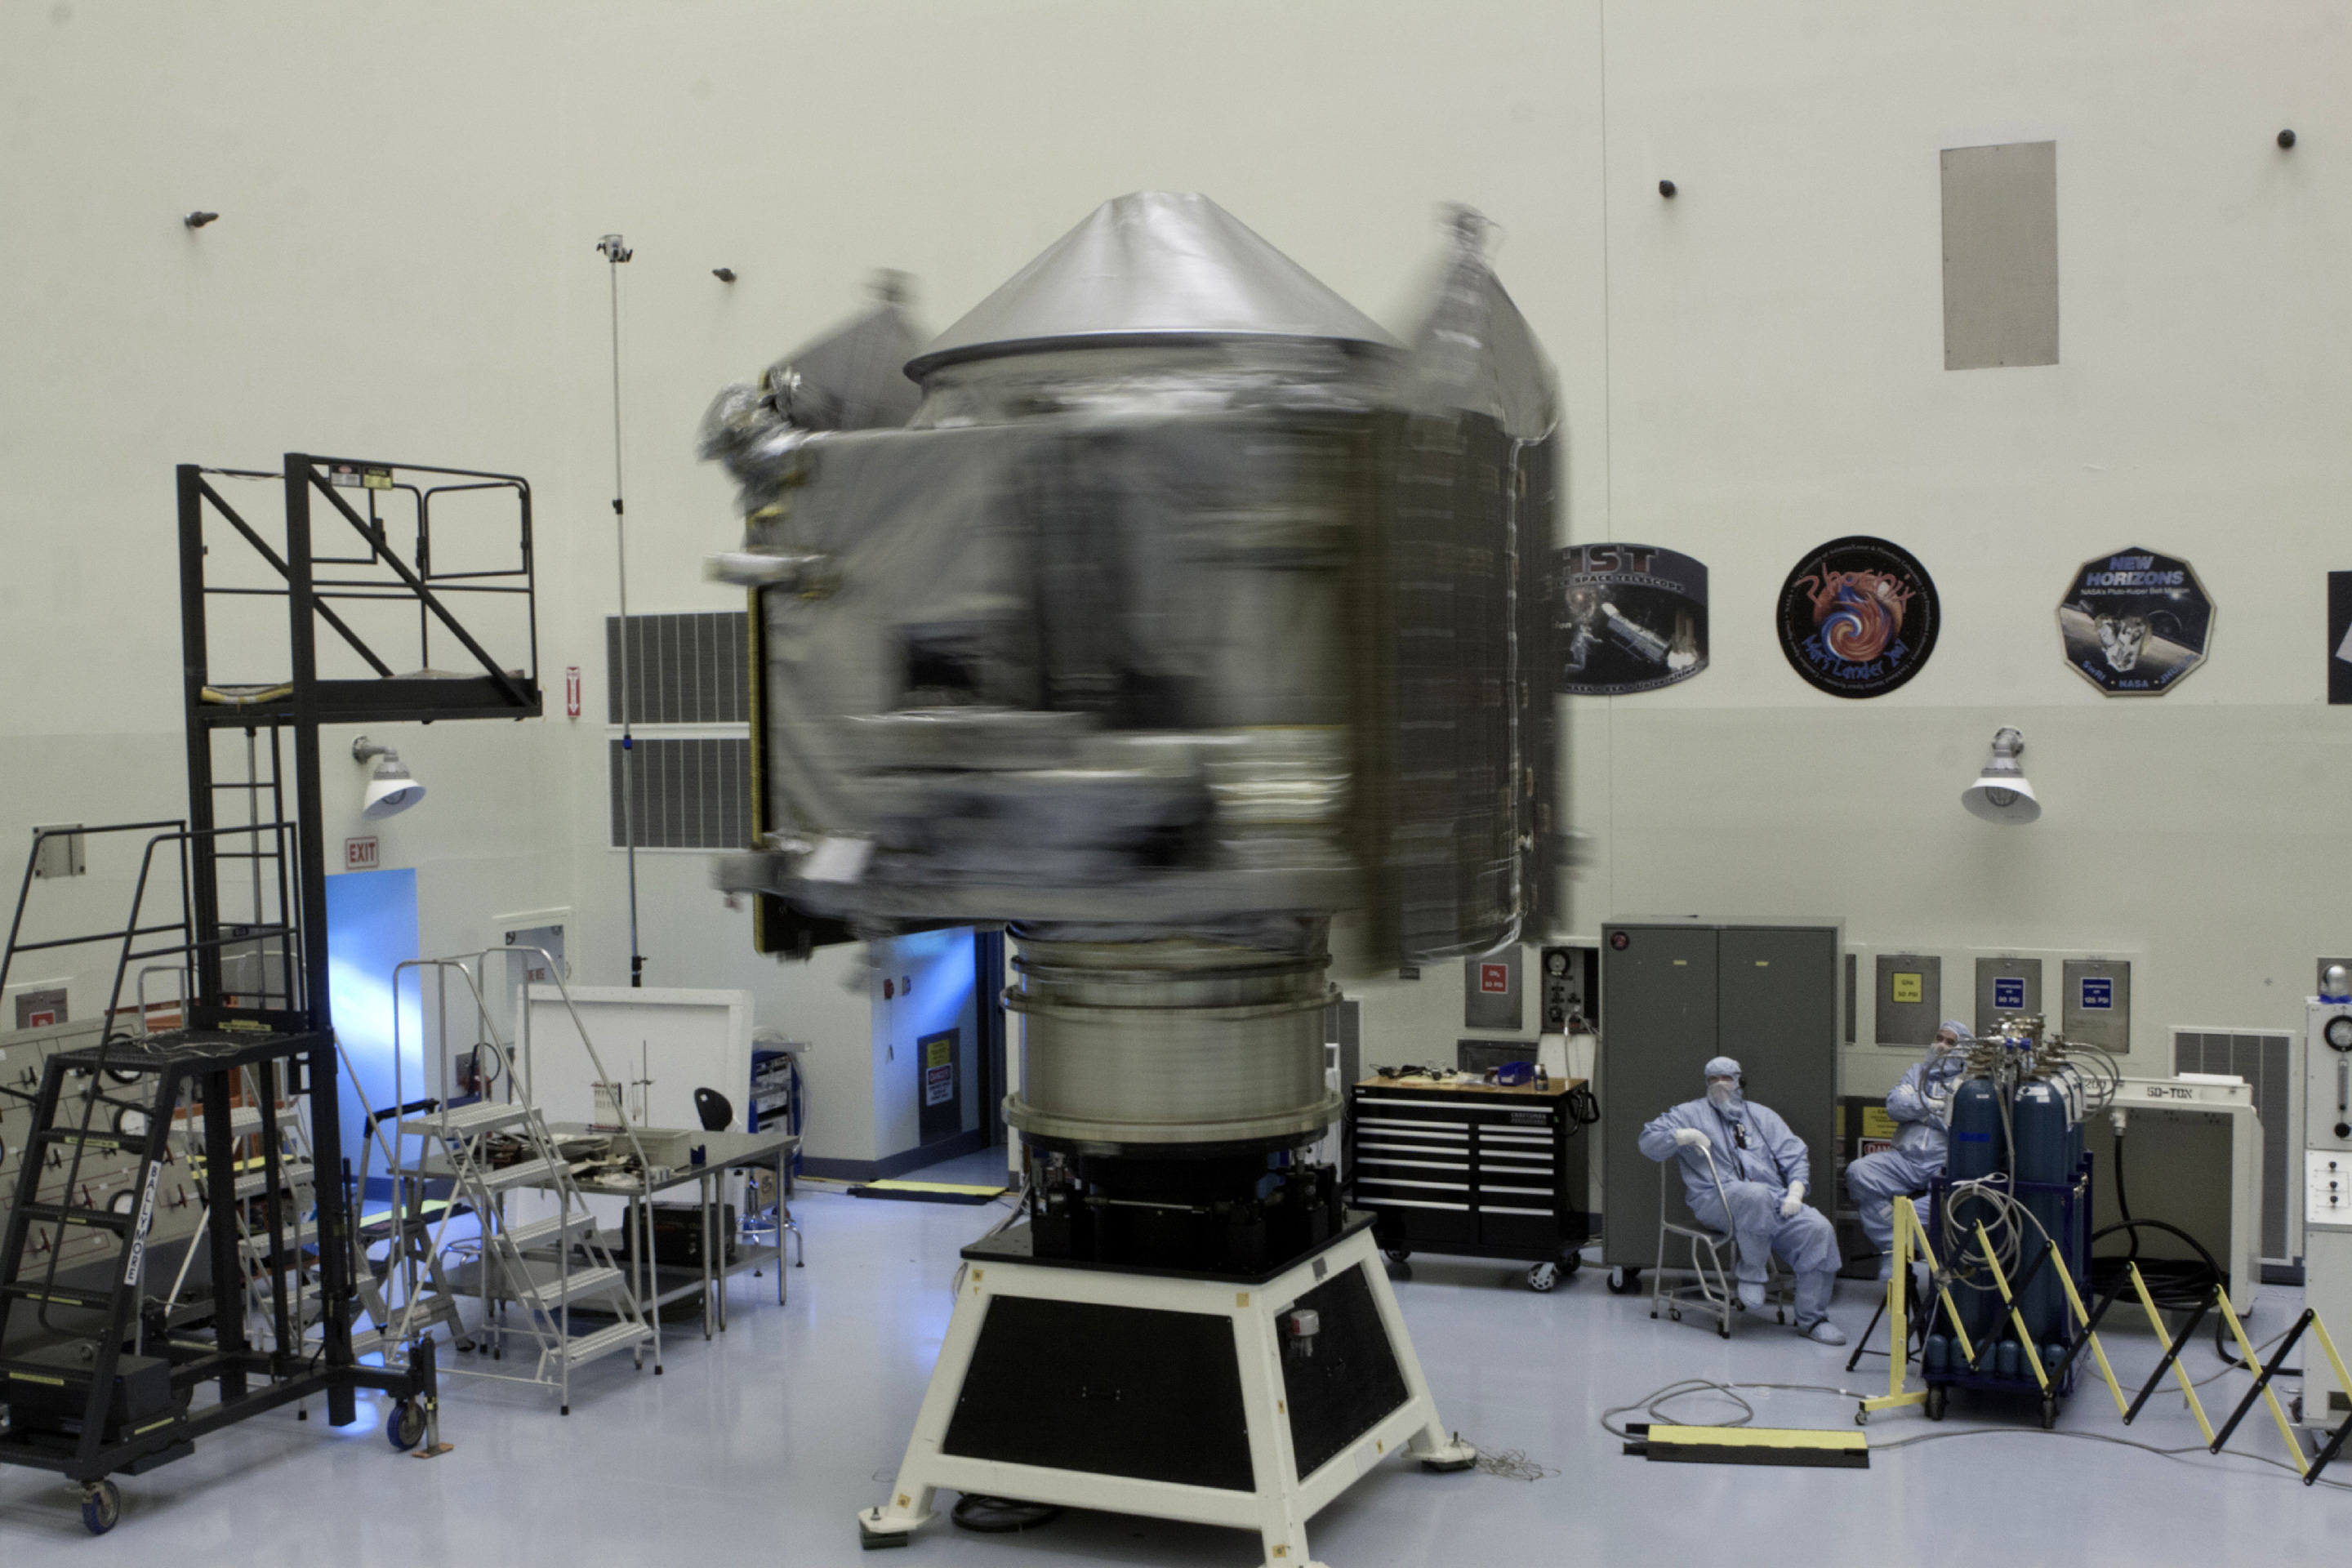 Inside the Payload Hazardous Servicing Facility at Kennedy Space Center in Florida, engineers and technicians perform a spin test of the MAVEN spacecraft. The operation is designed to verify that MAVEN is properly balanced as it spins during the initial mission activities. Photo: NASA/Kim Shiflett